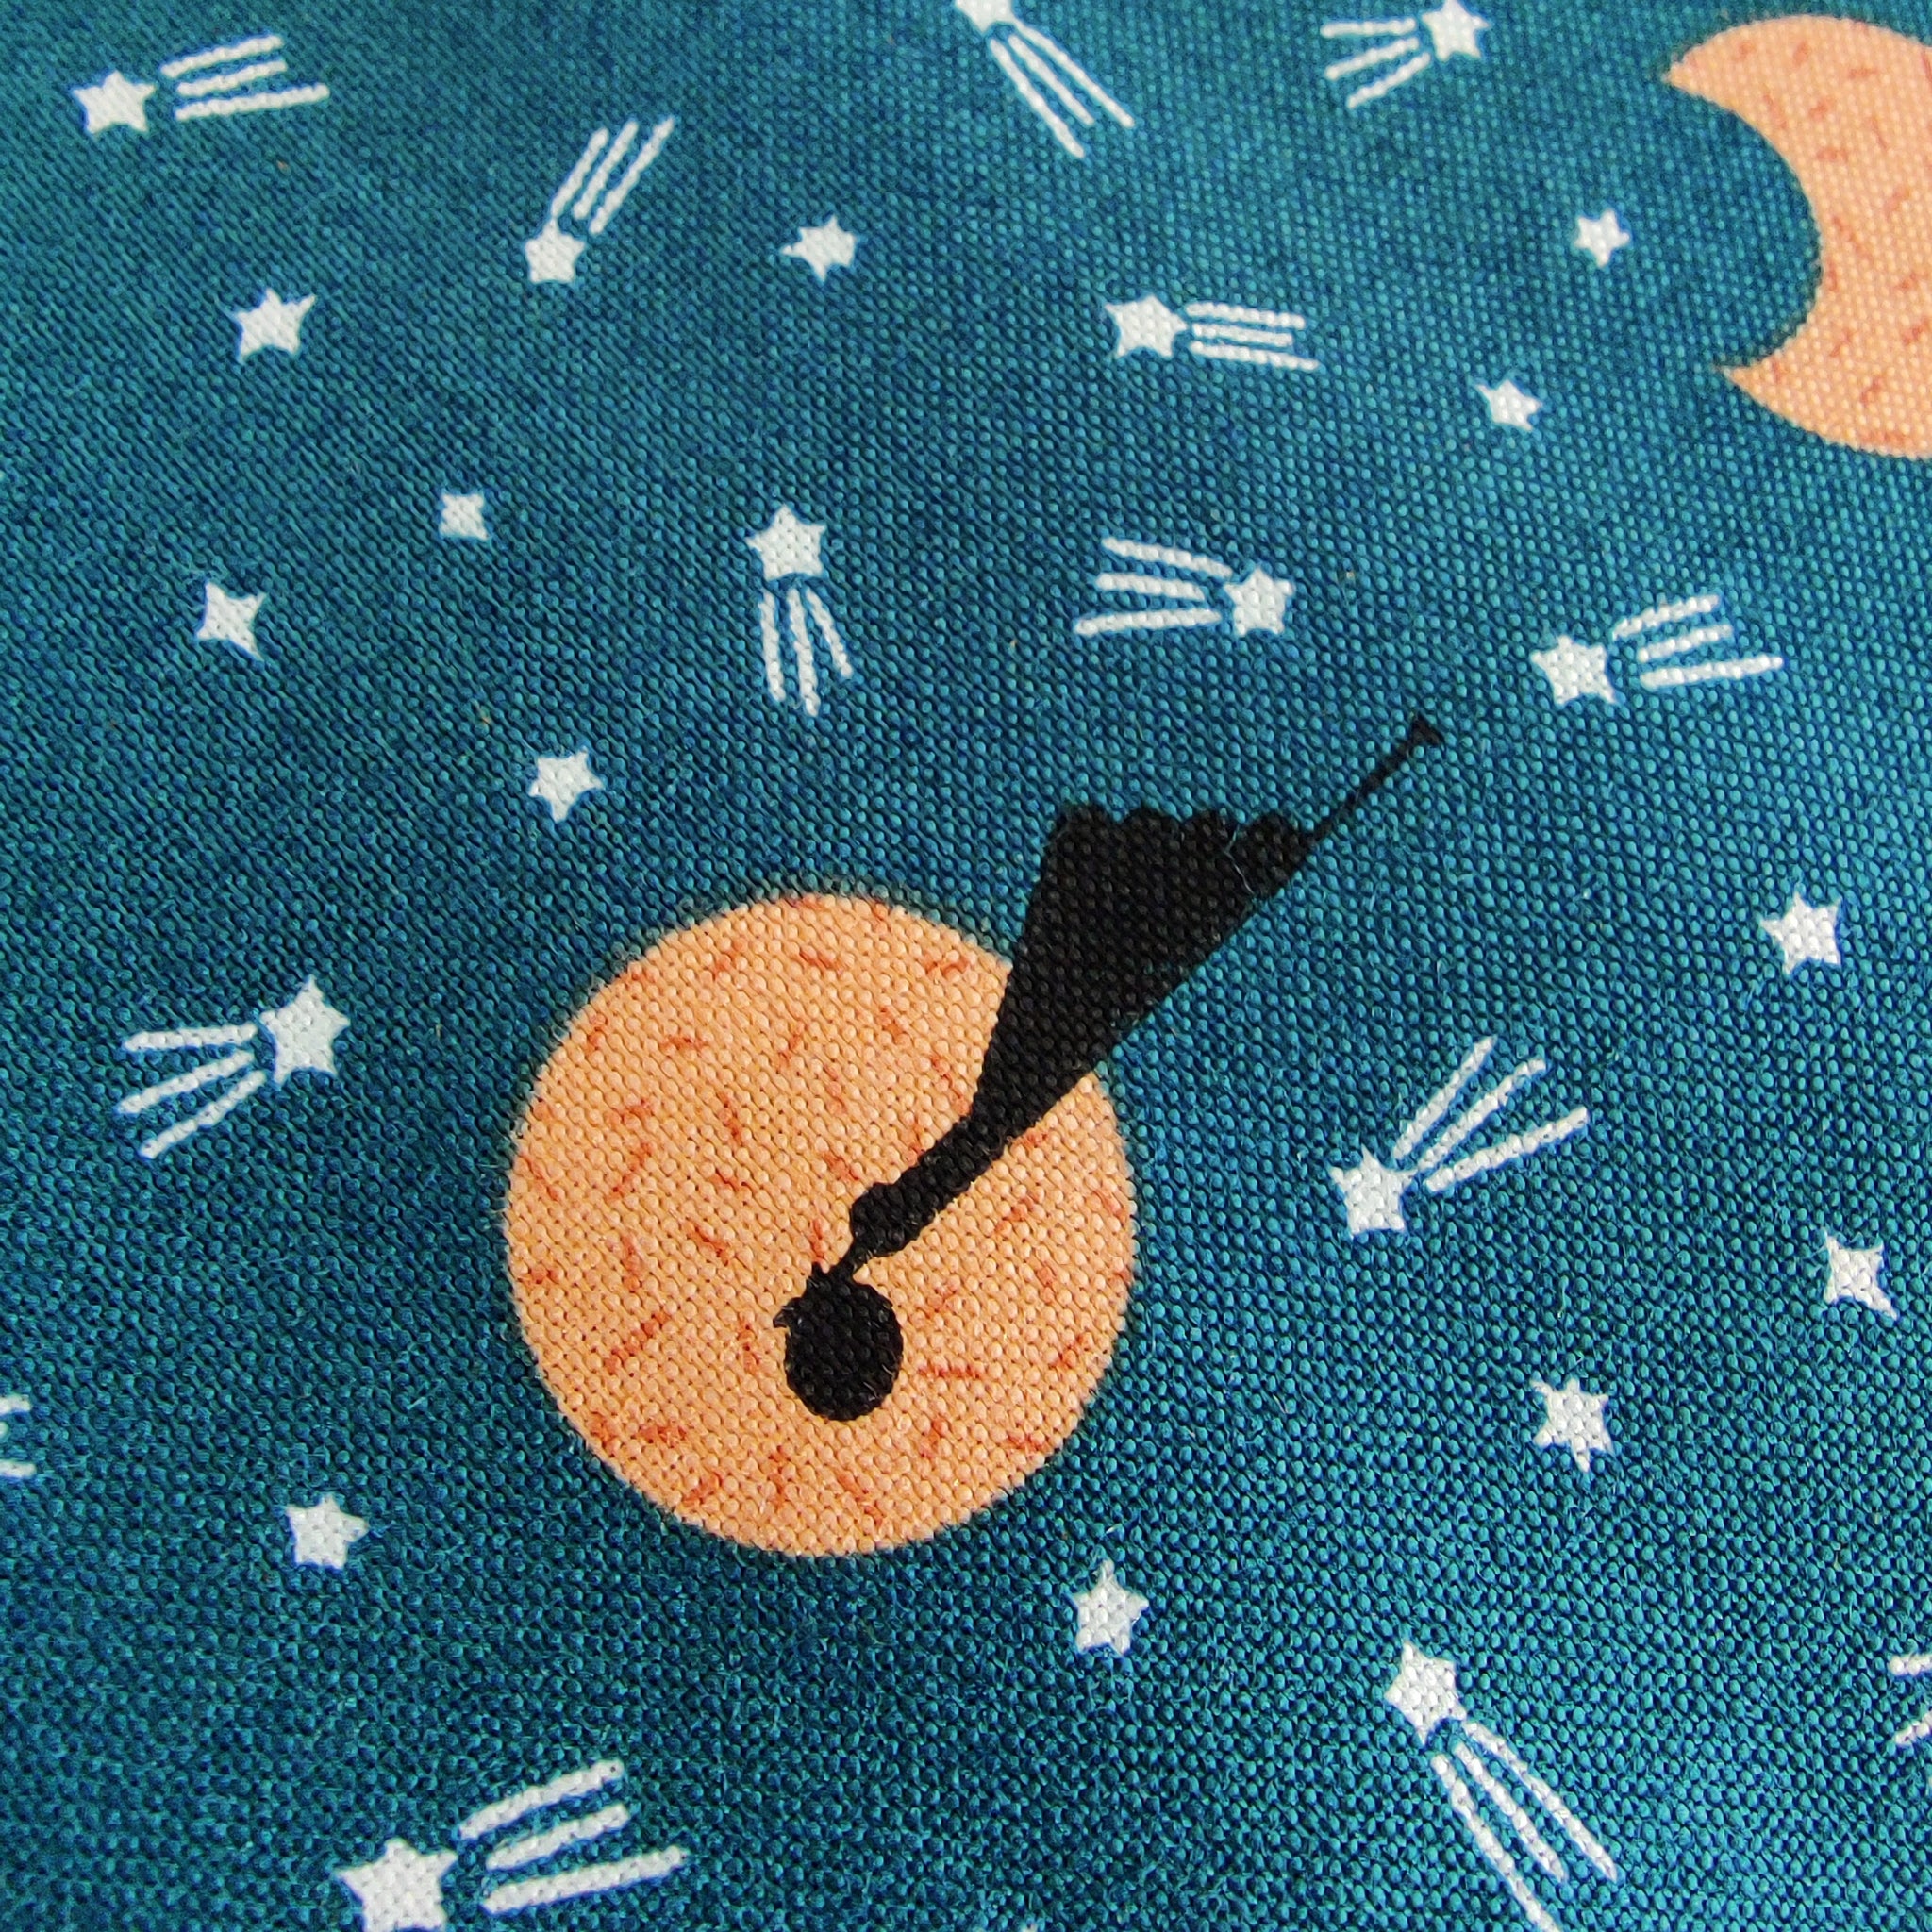 Night Time Stork Delivery Teal | Special Delivery by Lemonni | Cotton Fabric by the Half Yard